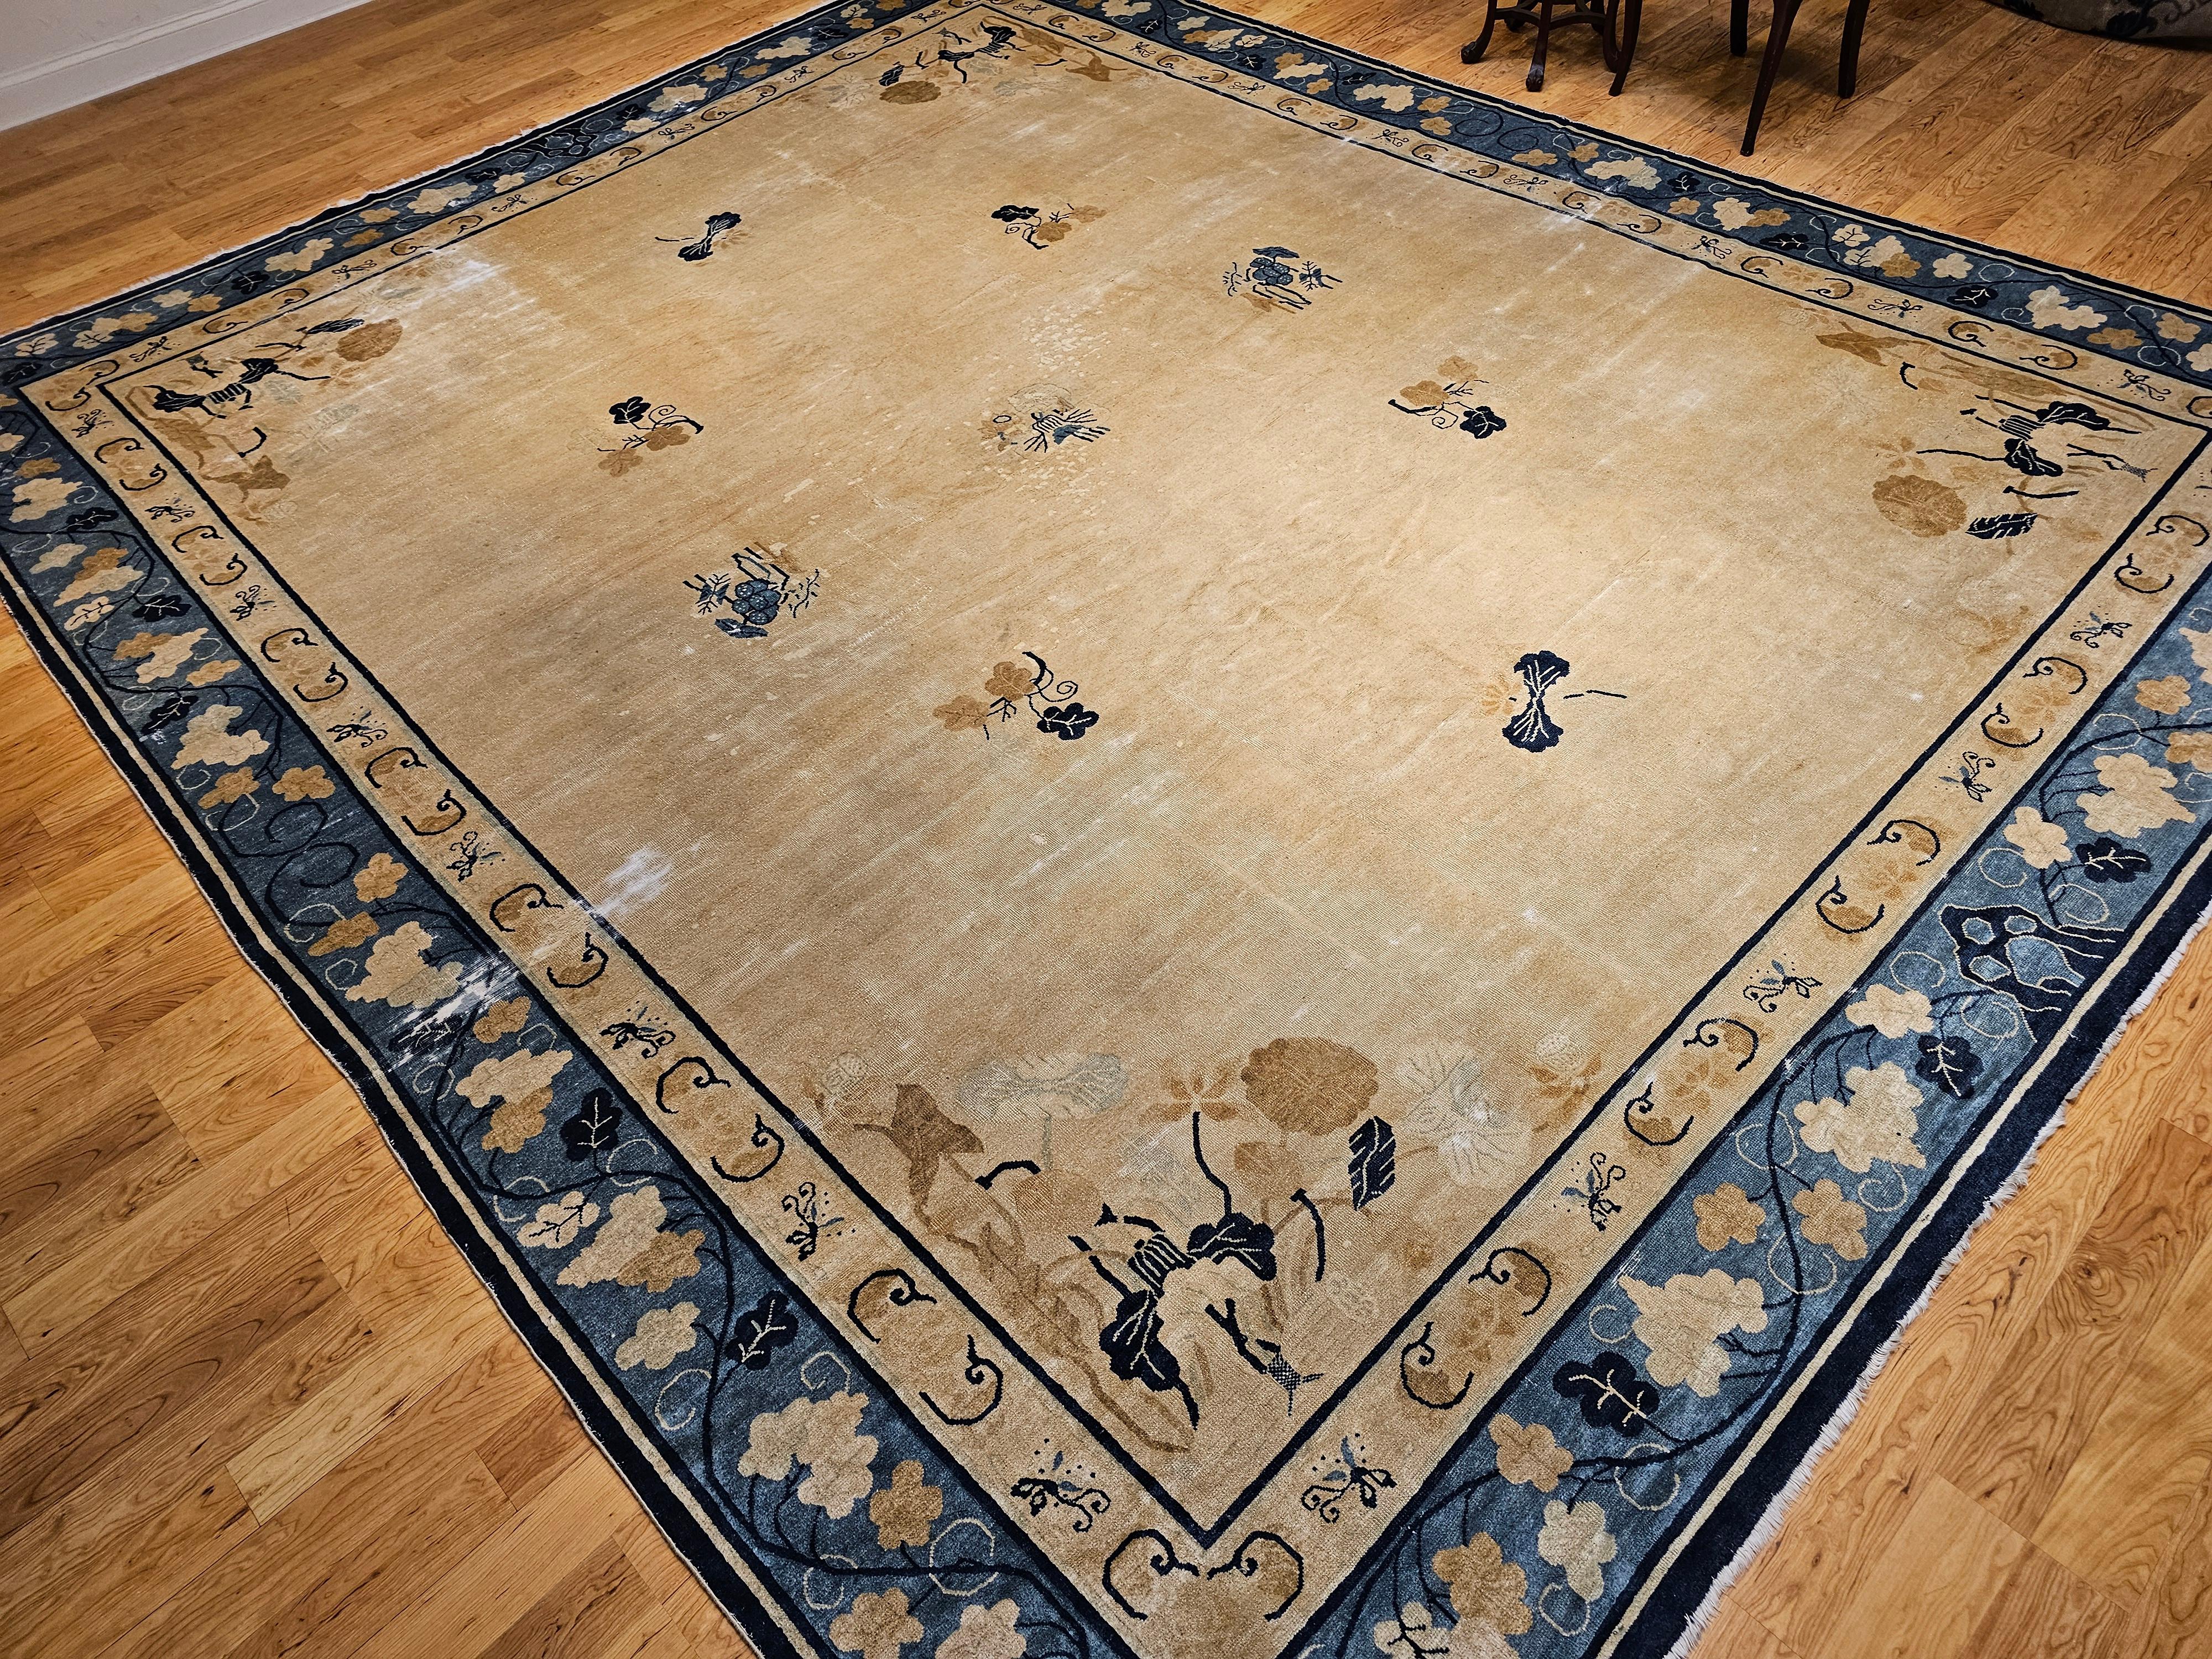 19th Century Oversized Chinese Peking Rug in Wheat, Navy, Brown, Green, Sky-Blue For Sale 5